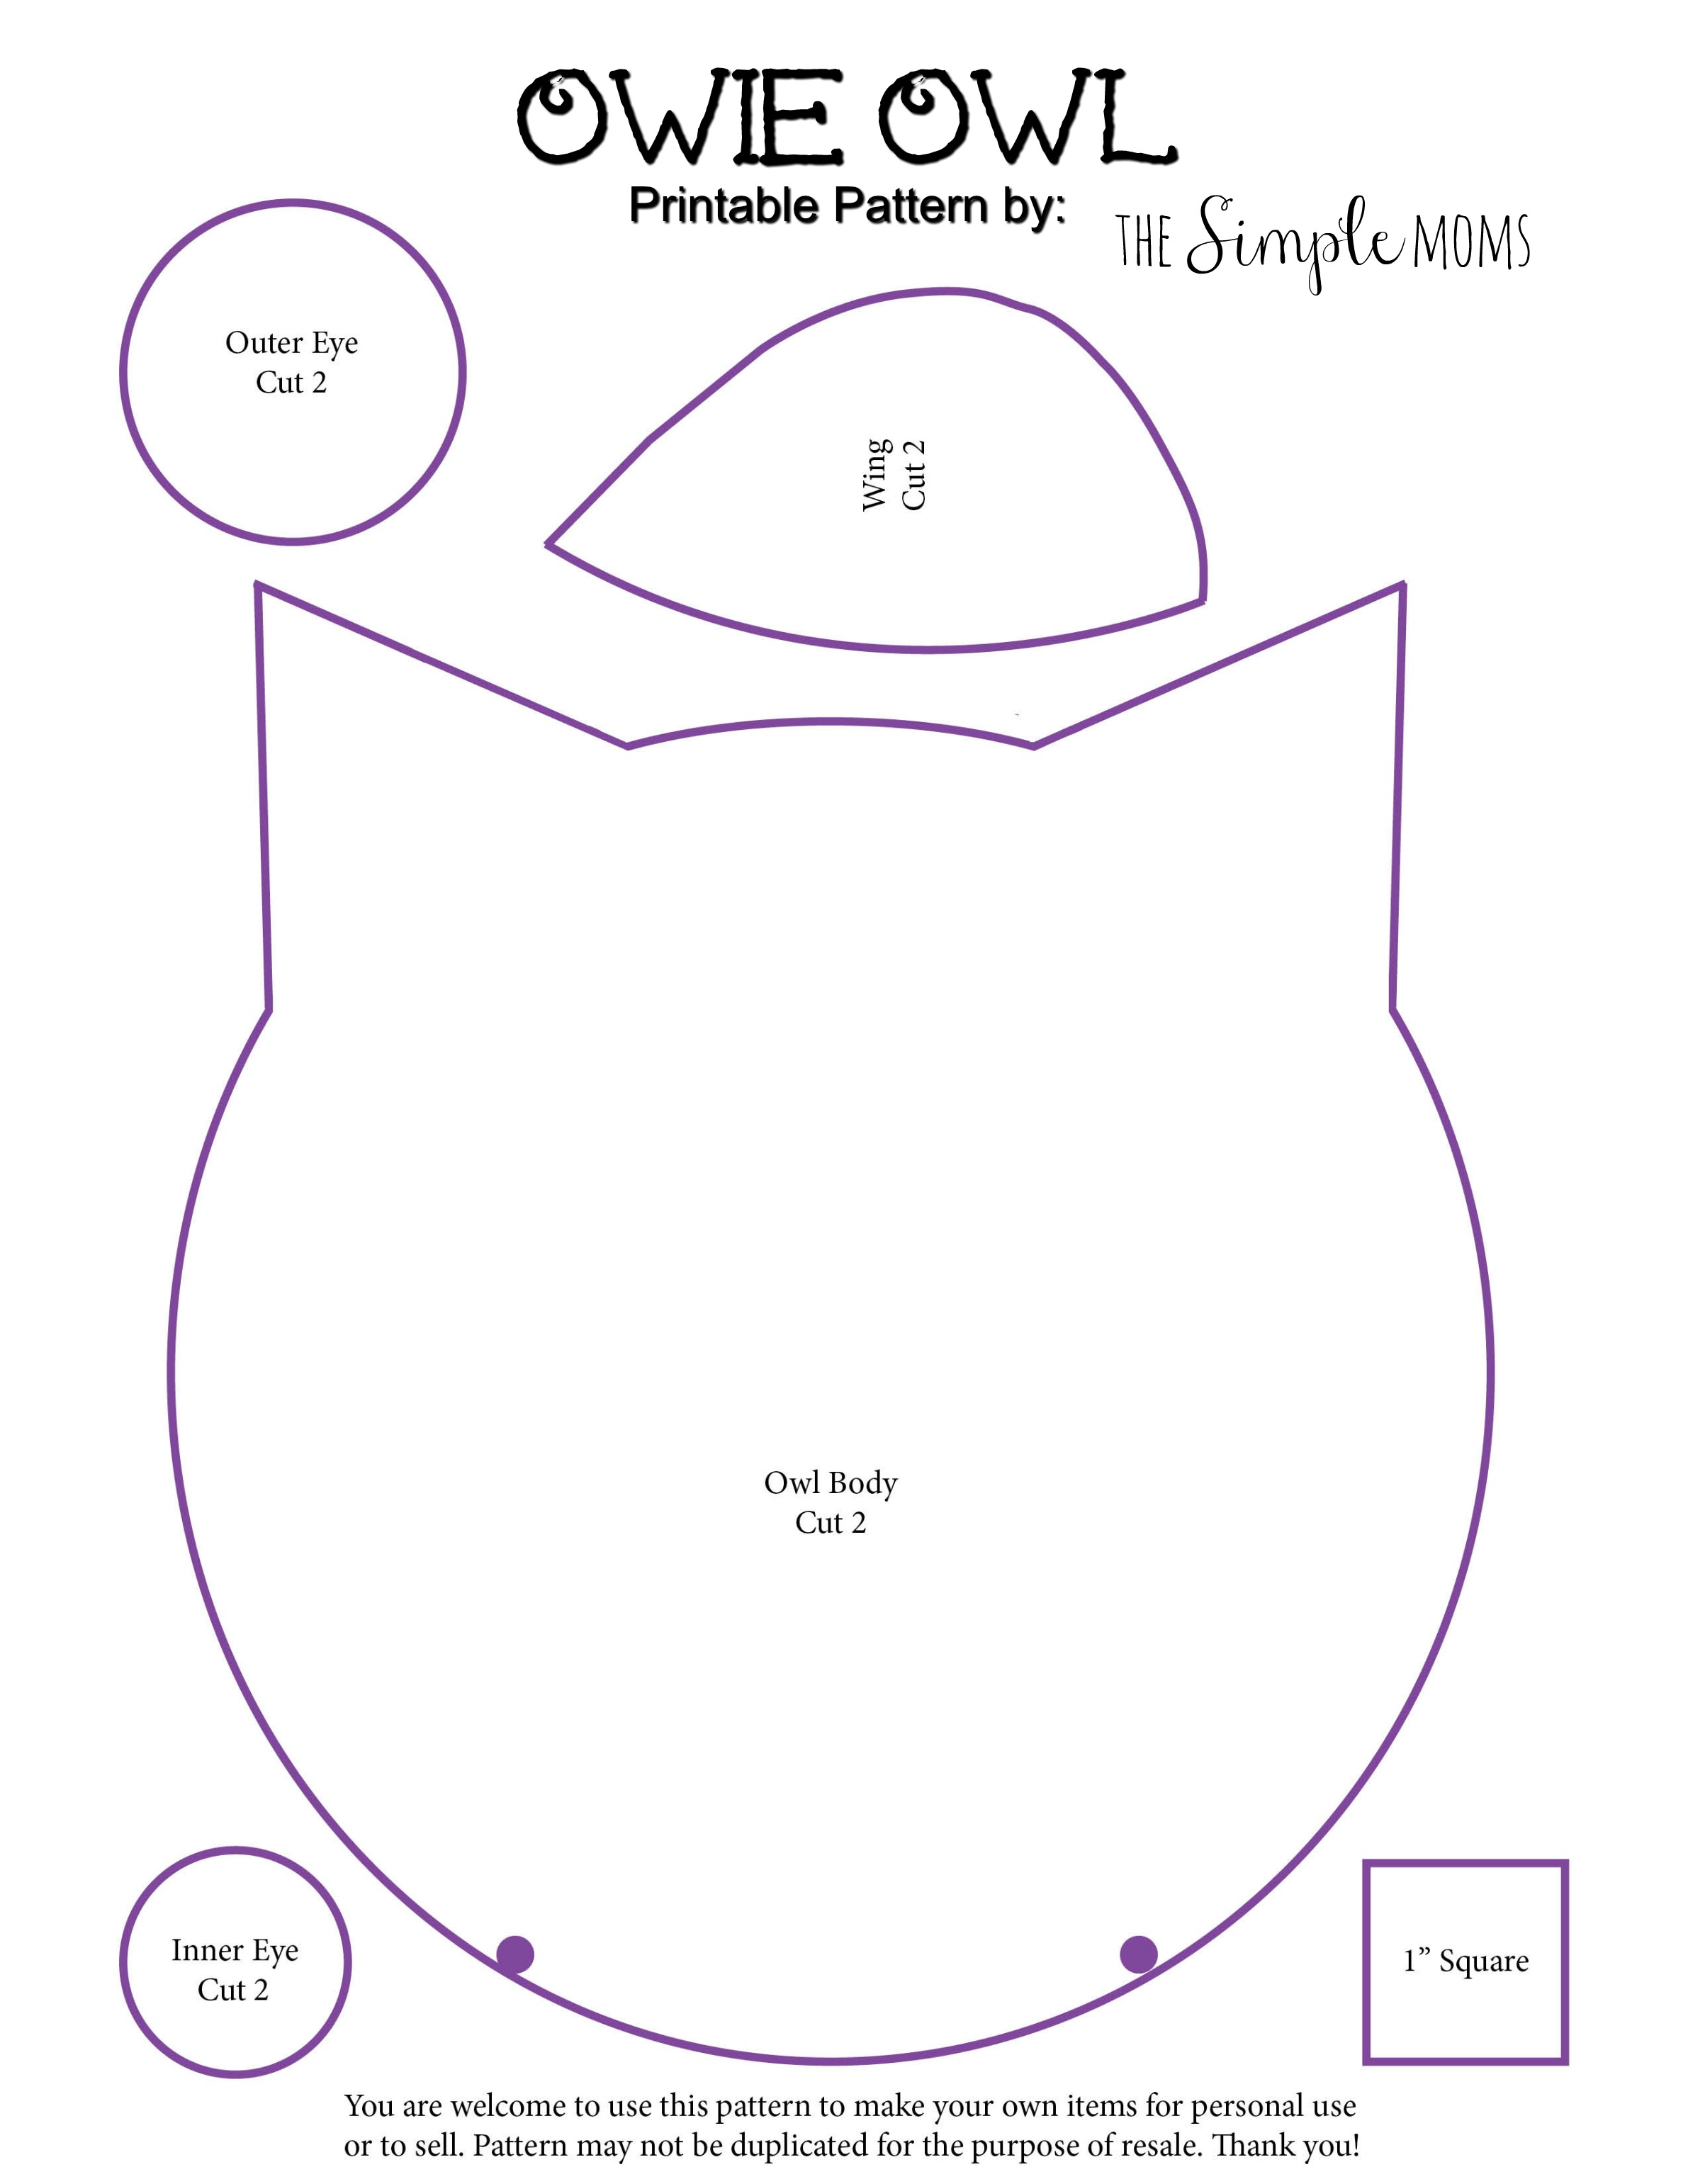 Owie Owl printable pattern by The Simple Moms